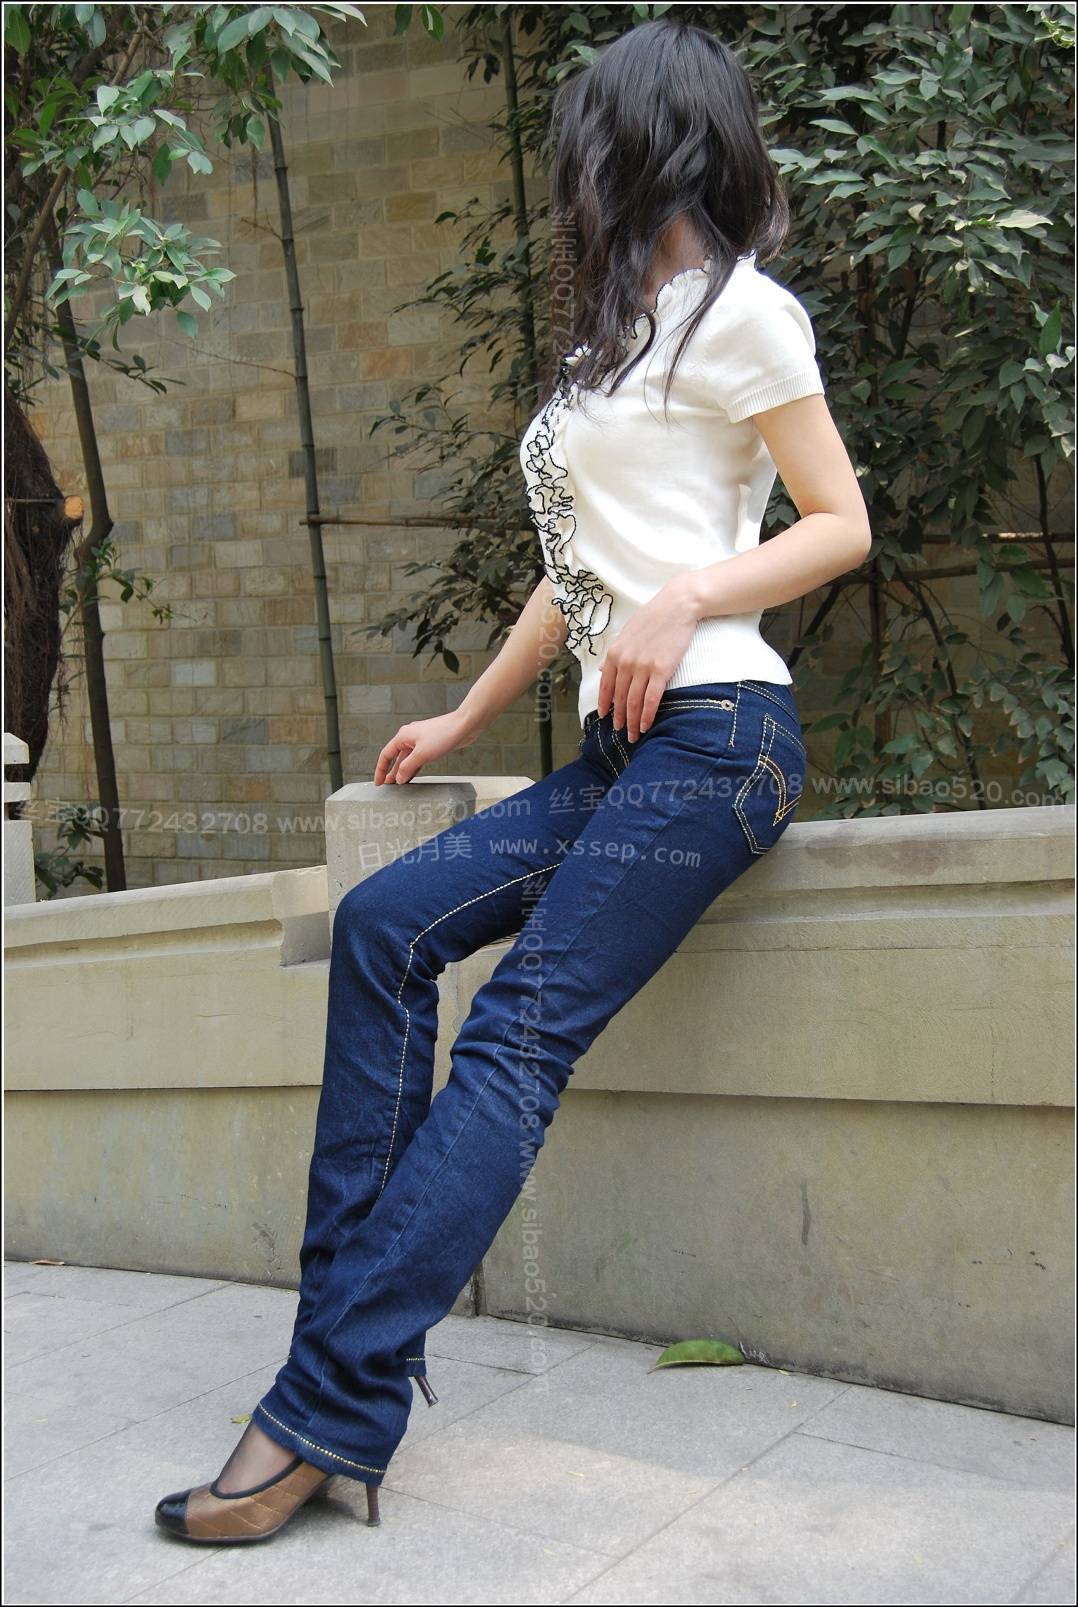 [Sibao] 2009.03.25 jeans in spring